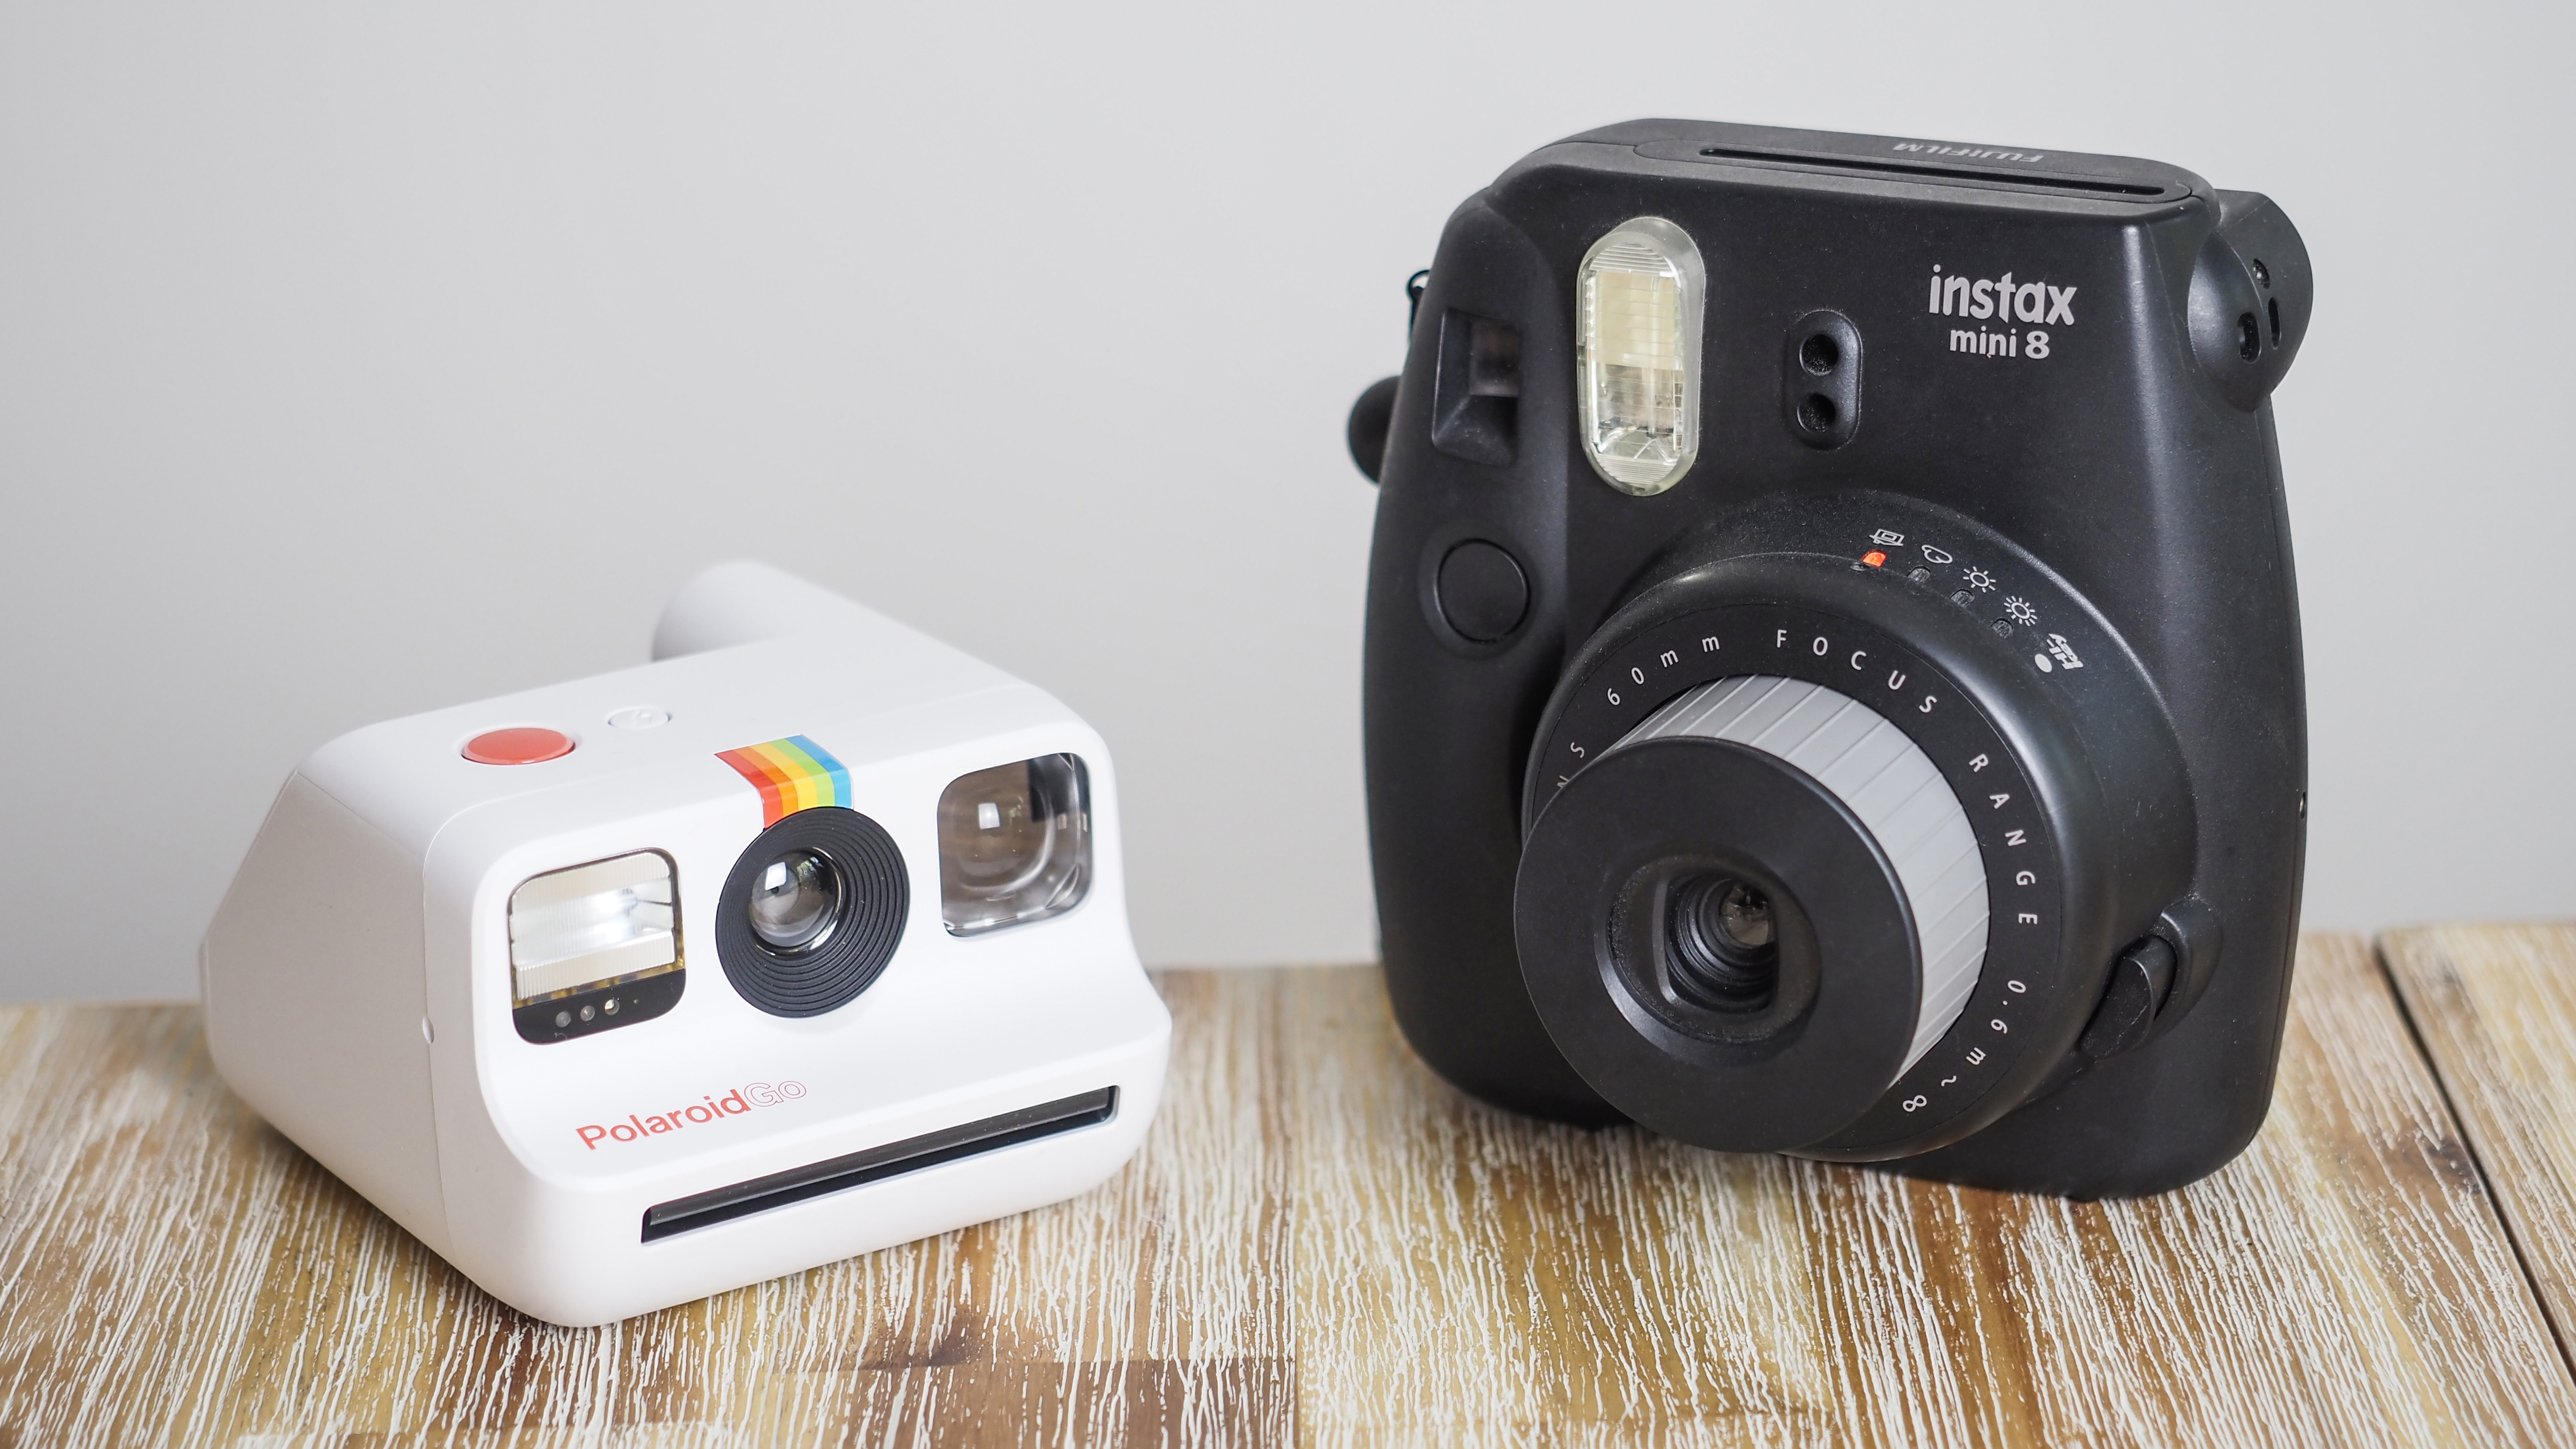 The Polaroid Go is so small, it makes the Instax Mini look like a